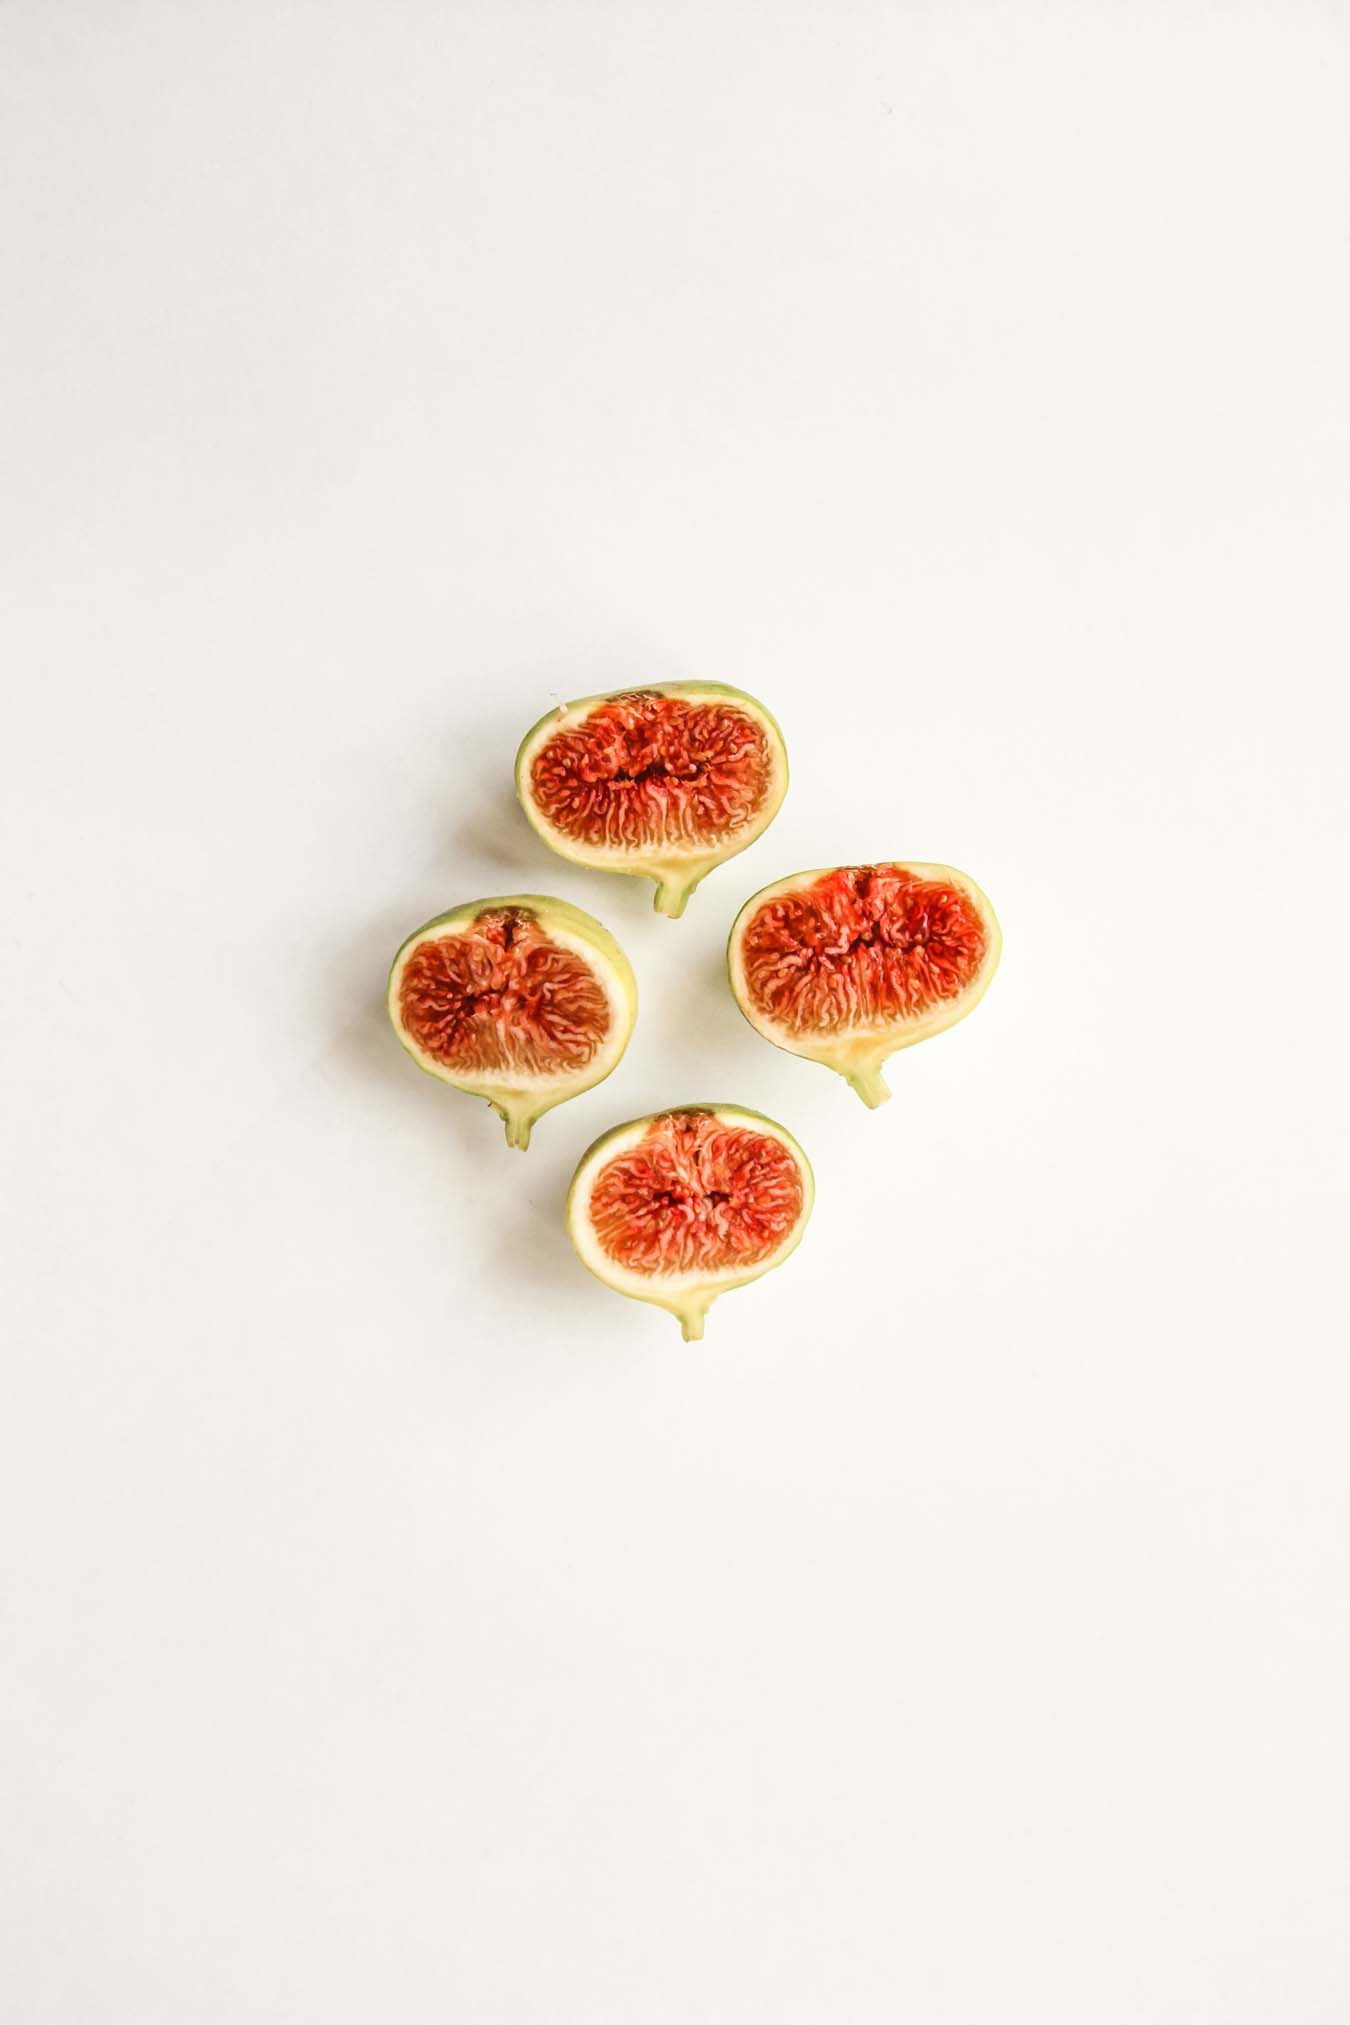 four red fleshed fig halves are lying on a white background - their stem bases point downward